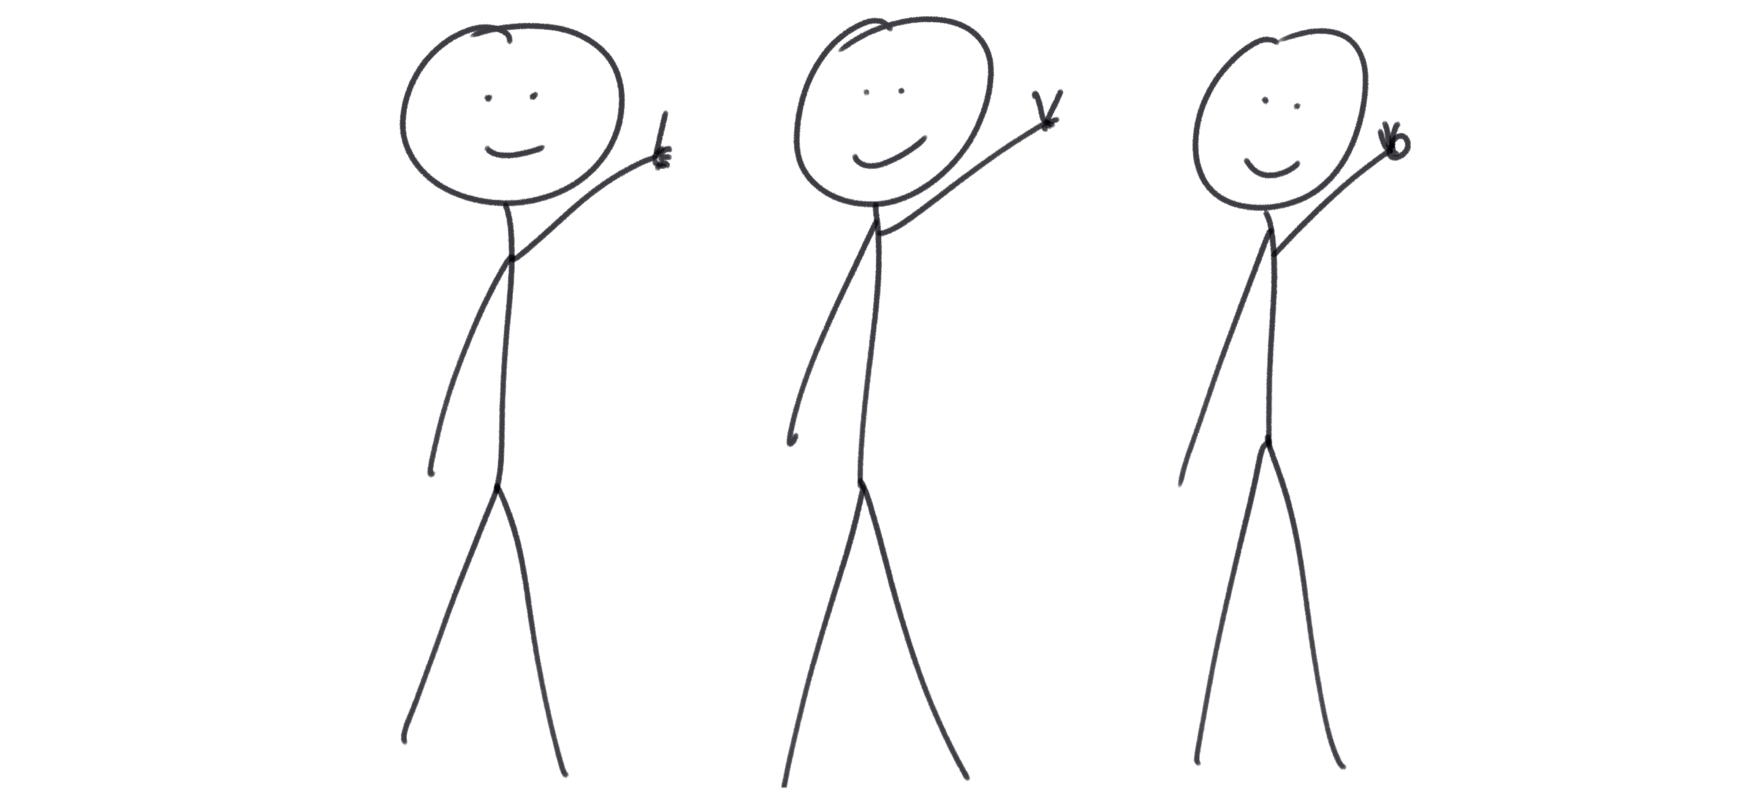 Stick figures counting 1, 2, 3.